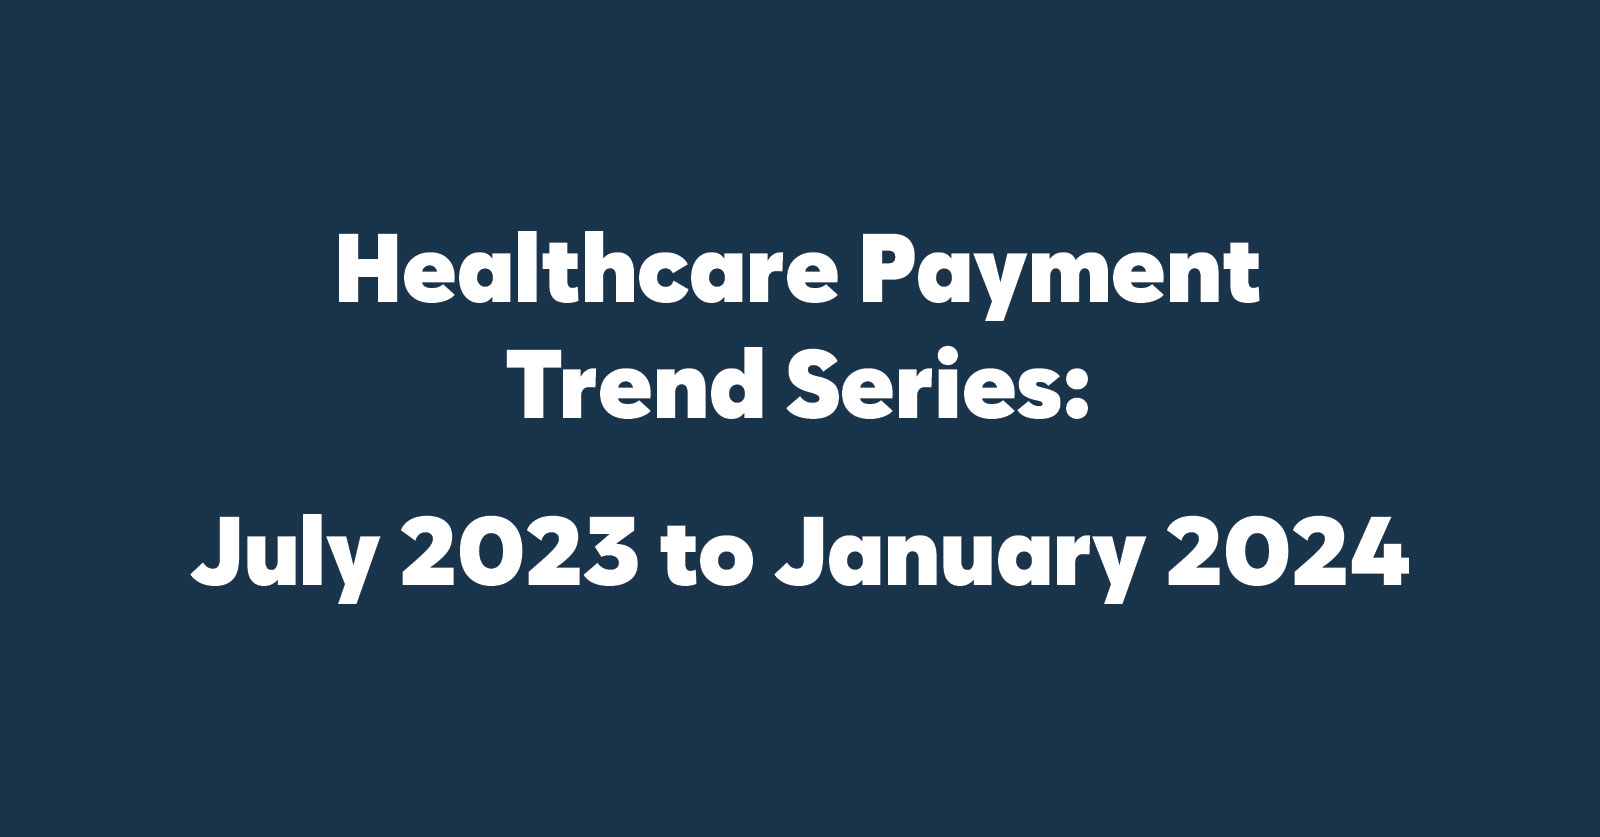 Healthcare Payment Rates from July 2023 to Jan 2024